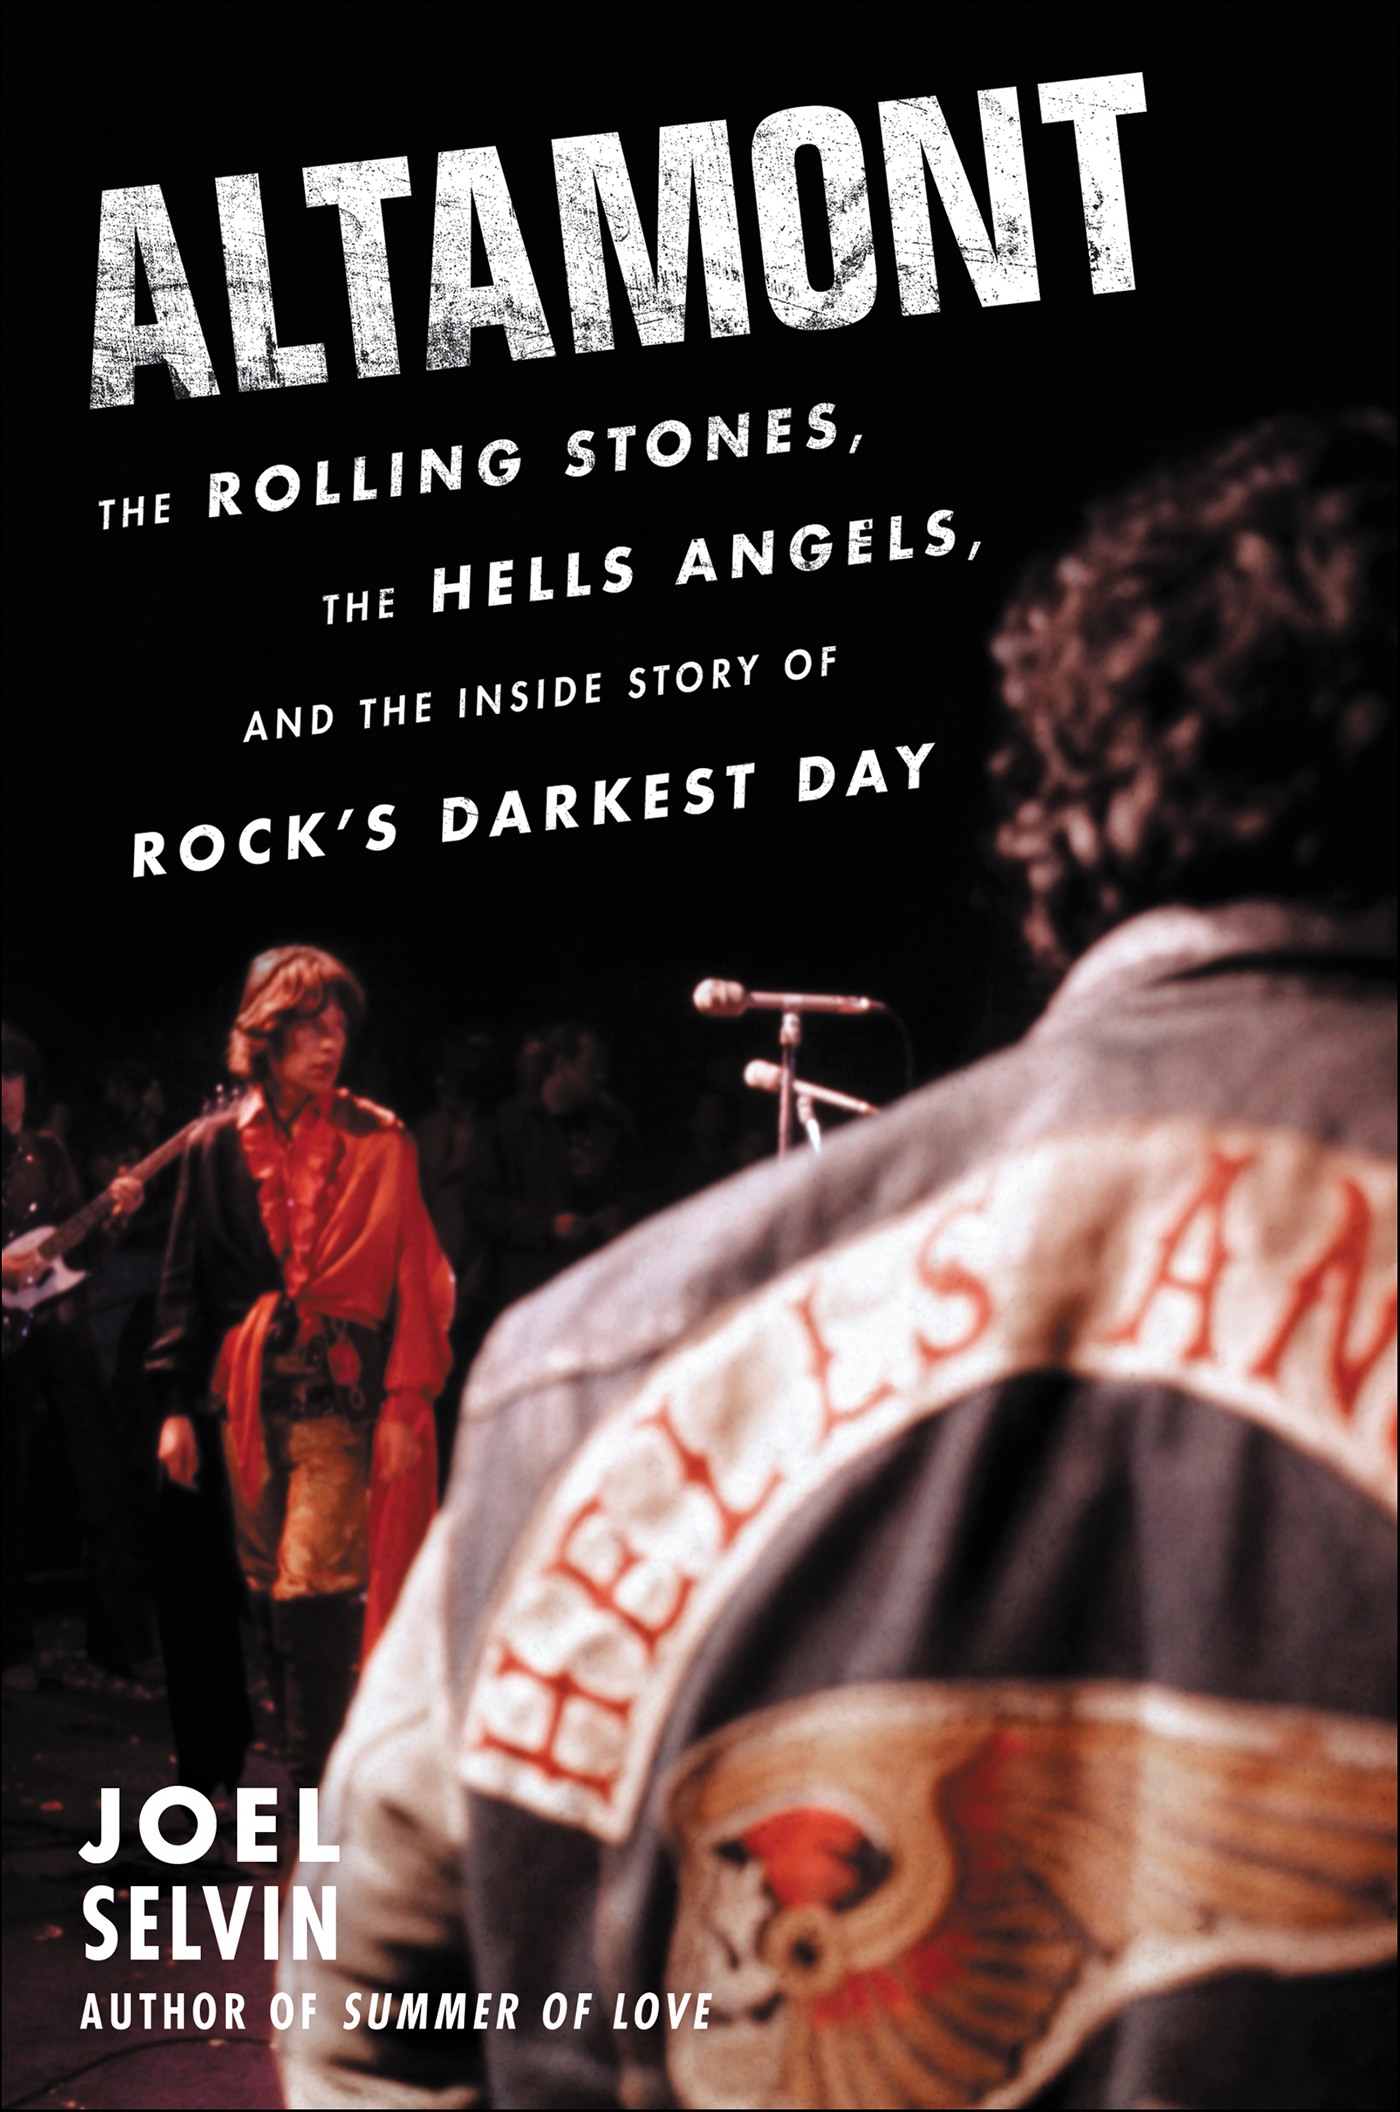 Umschlagbild für Altamont [electronic resource] : The Rolling Stones, the Hells Angels, and the Inside Story of Rock's Darkest Day